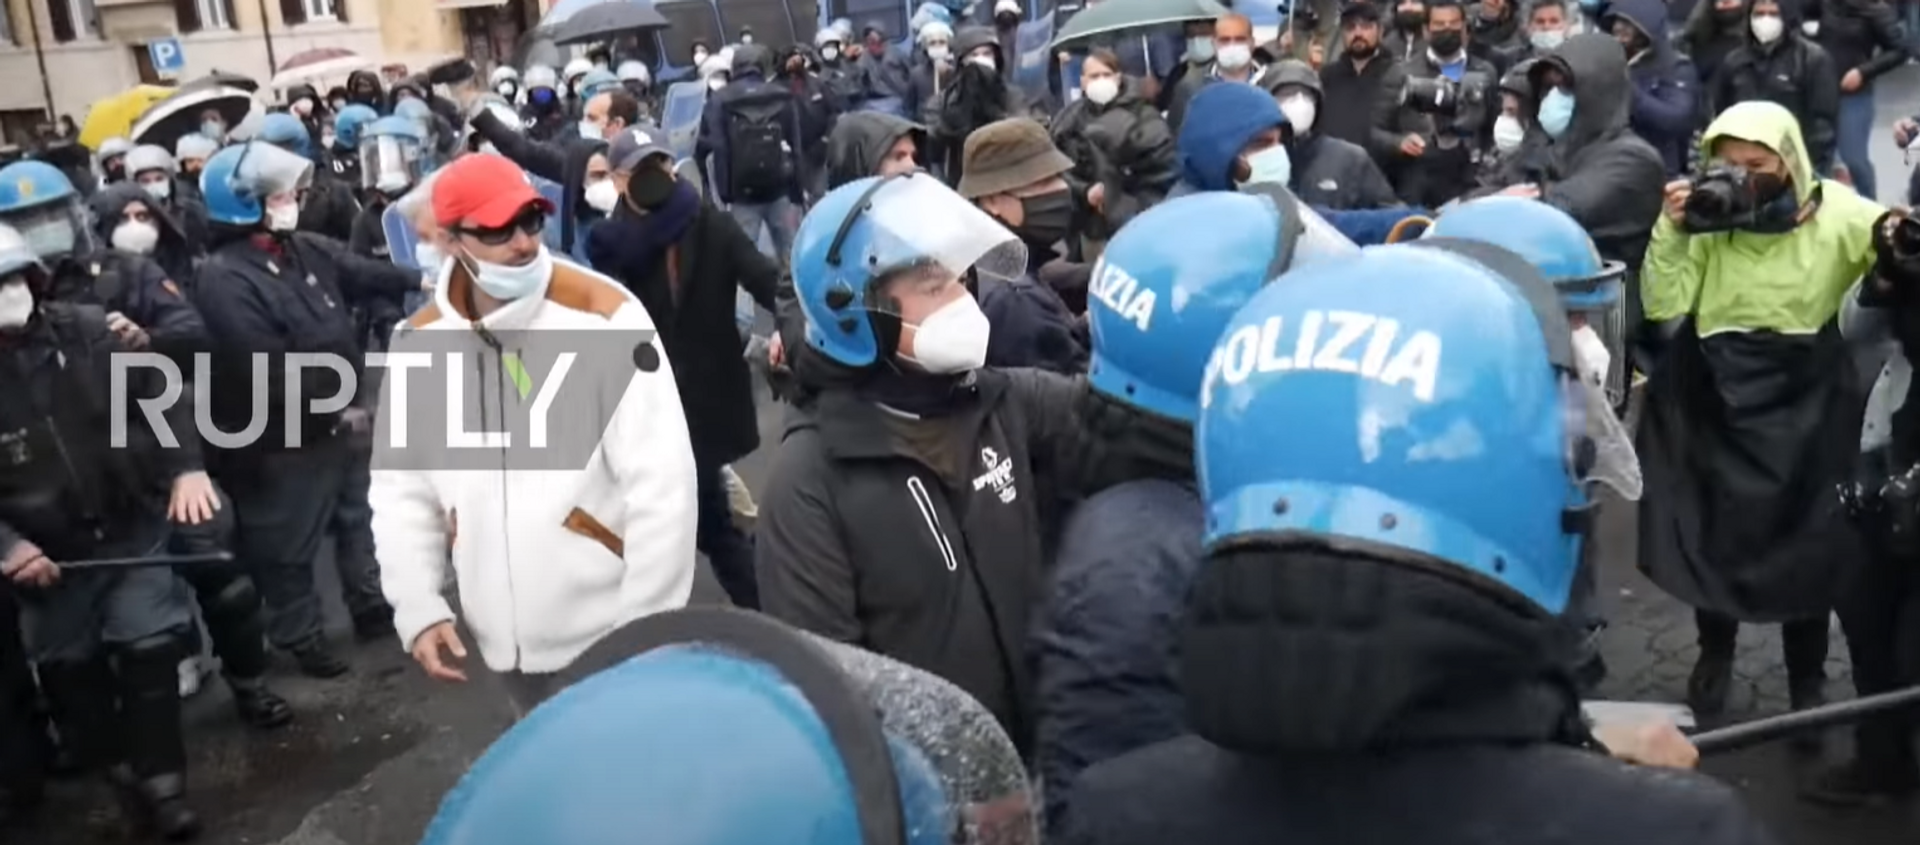 Italy: Business owners scuffle with police at Rome protest against COVID restrictions - Sputnik Moldova-România, 1920, 14.04.2021